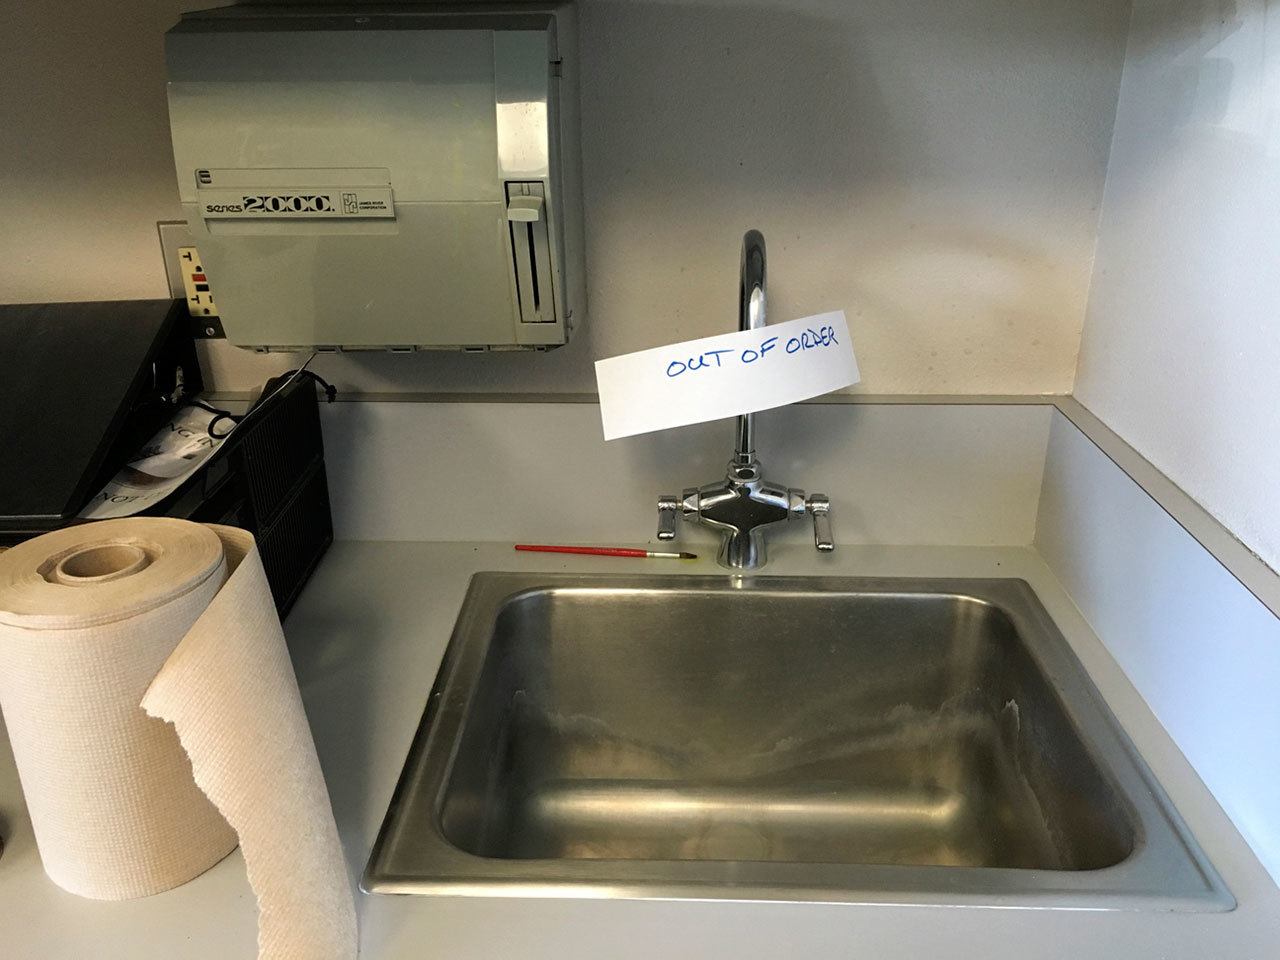 All sink fixtures in Greywolf Elementary School and two at Helen Haller Elementary School are to be replaced before school starts due to concerns about excess lead being found in some of the fixtures. (Matthew Nash/Olympic Peninsula News Group)